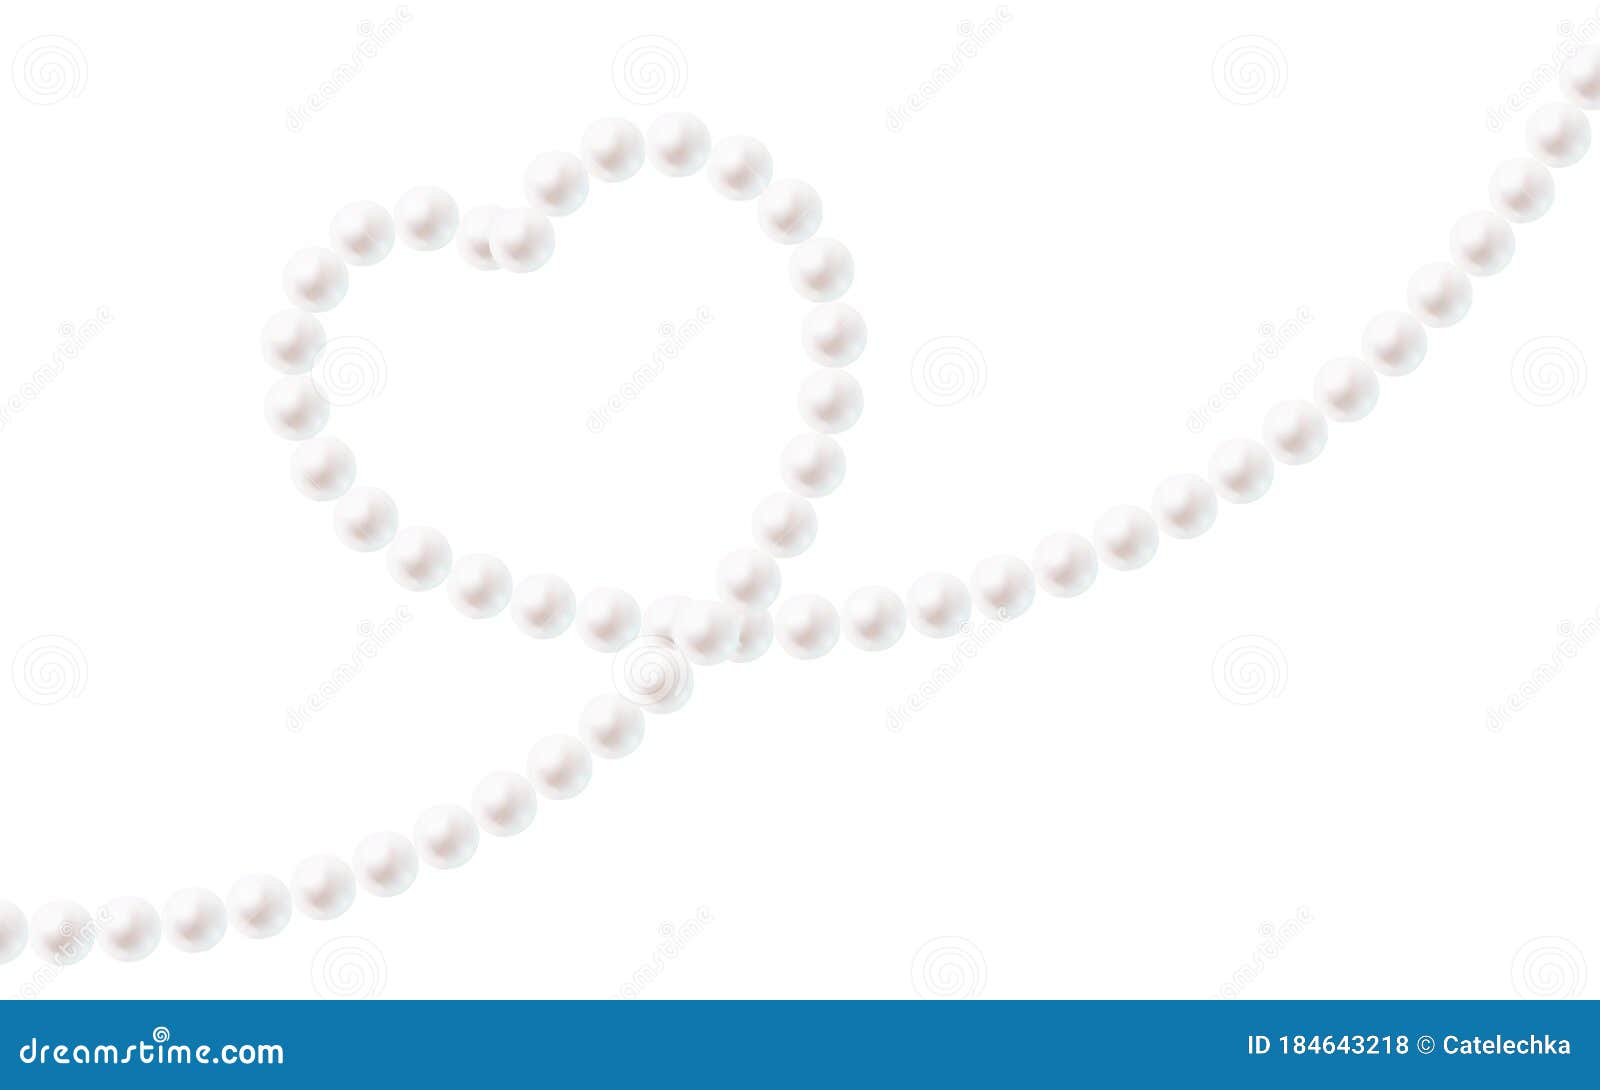 Pink background with ornament and pearls Vector Image